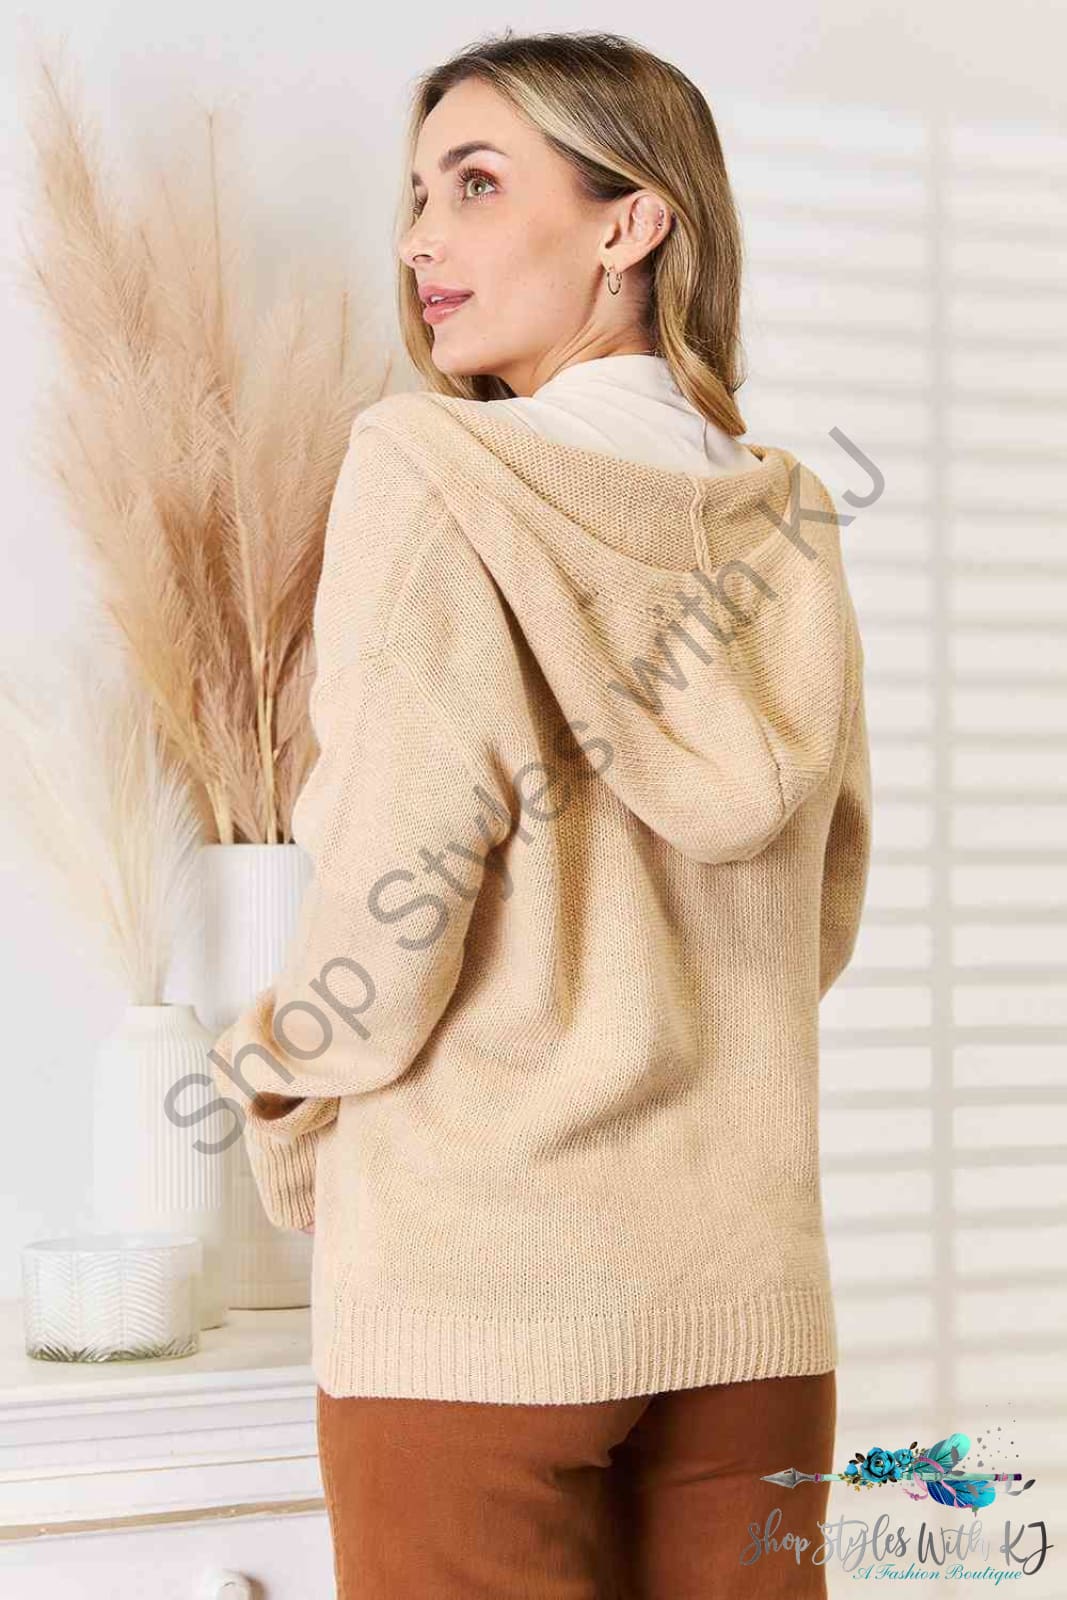 Woven Right Button-Down Long Sleeve Hooded Sweater